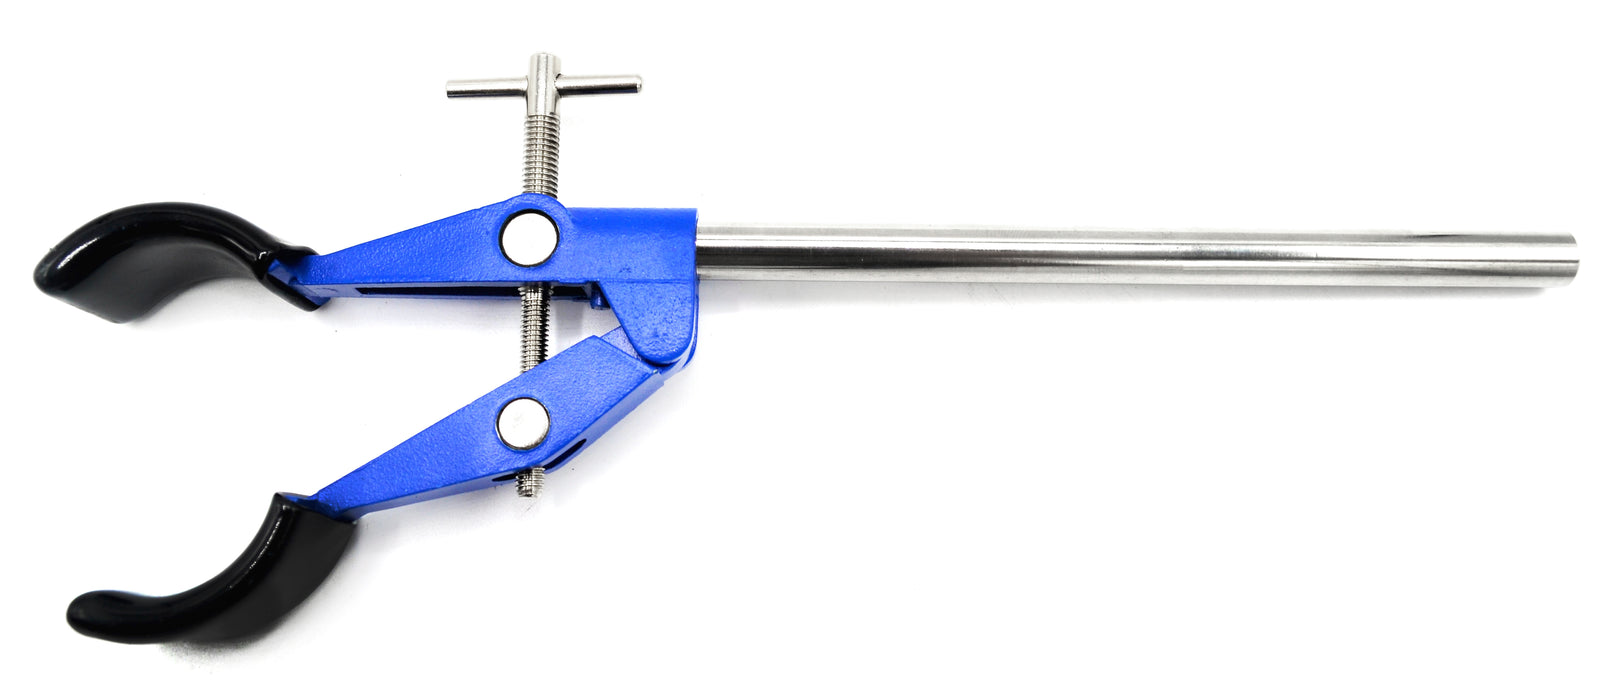 2 Prong Burette Clamp on Stainless Steel Rod - 4.25" Max Opening